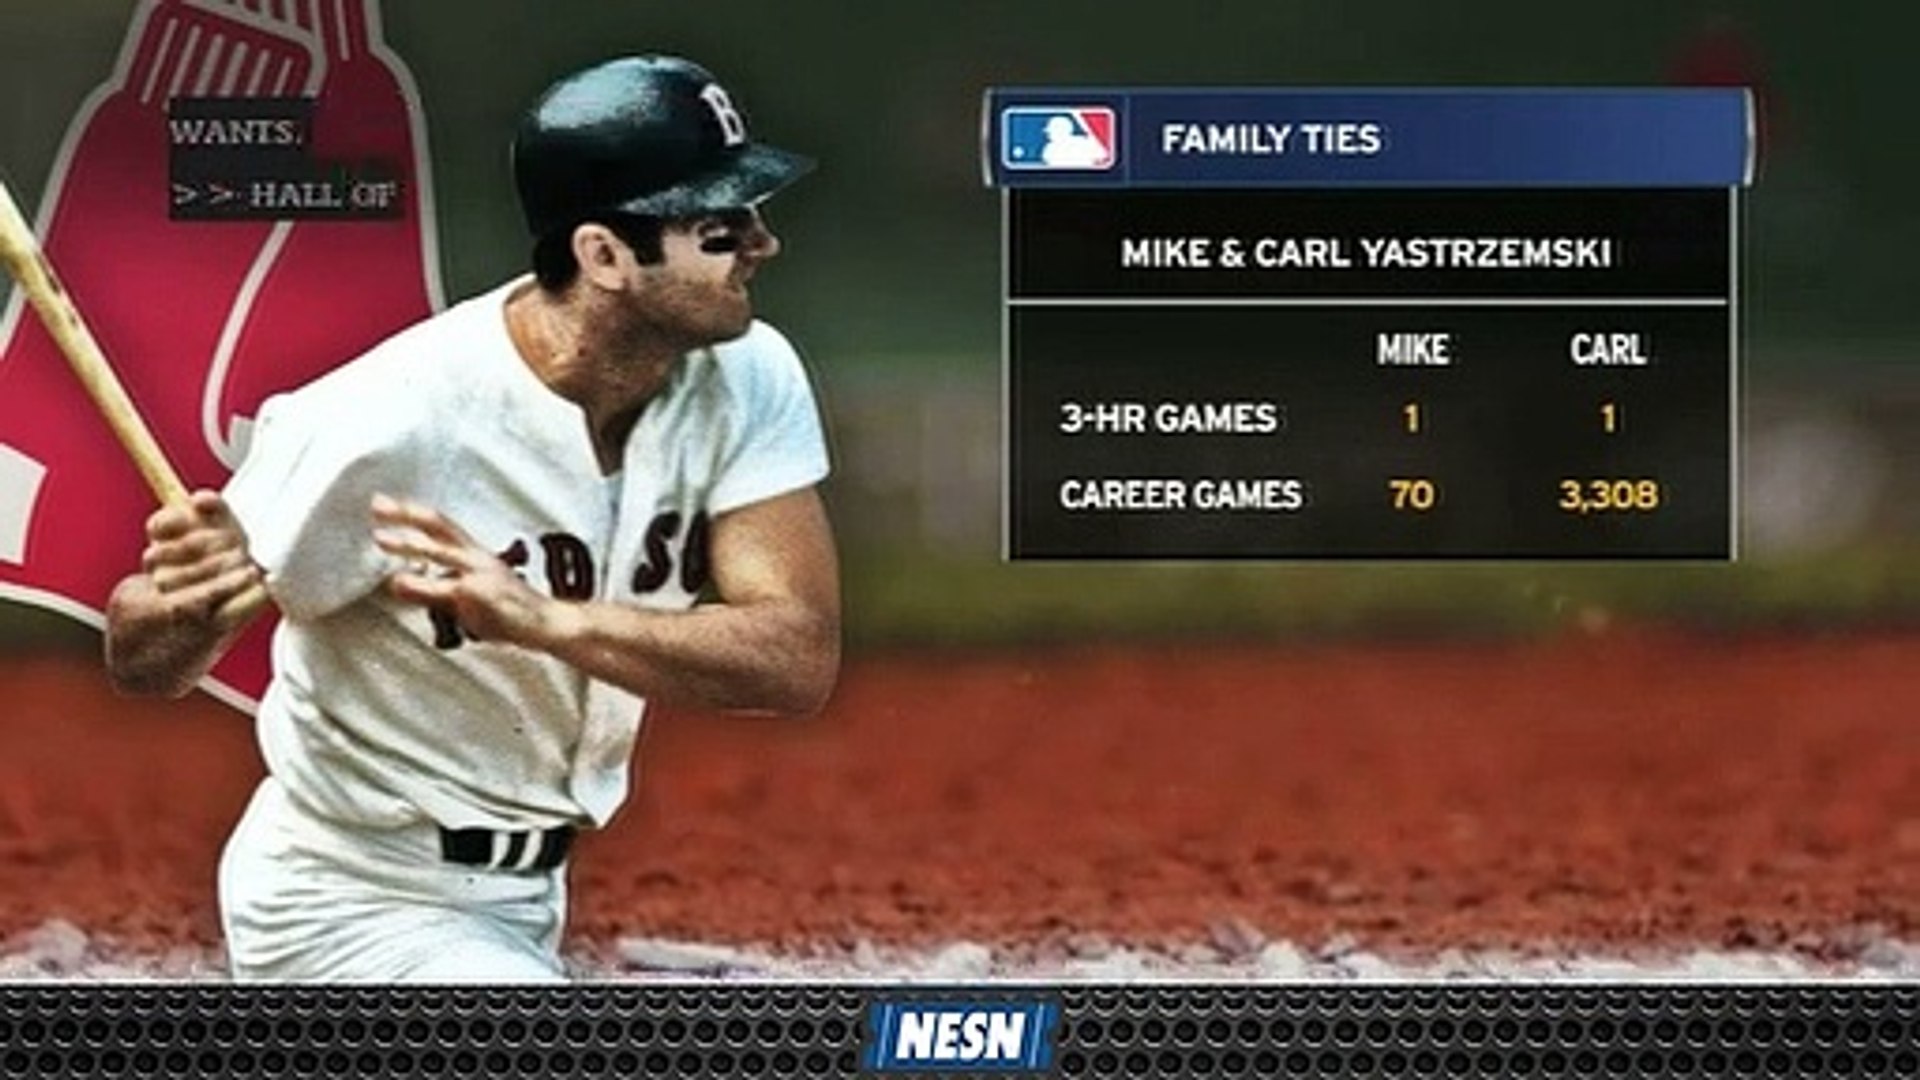 Carl, Mike Yastrzemski Both Have One Three-Home Run Game With One